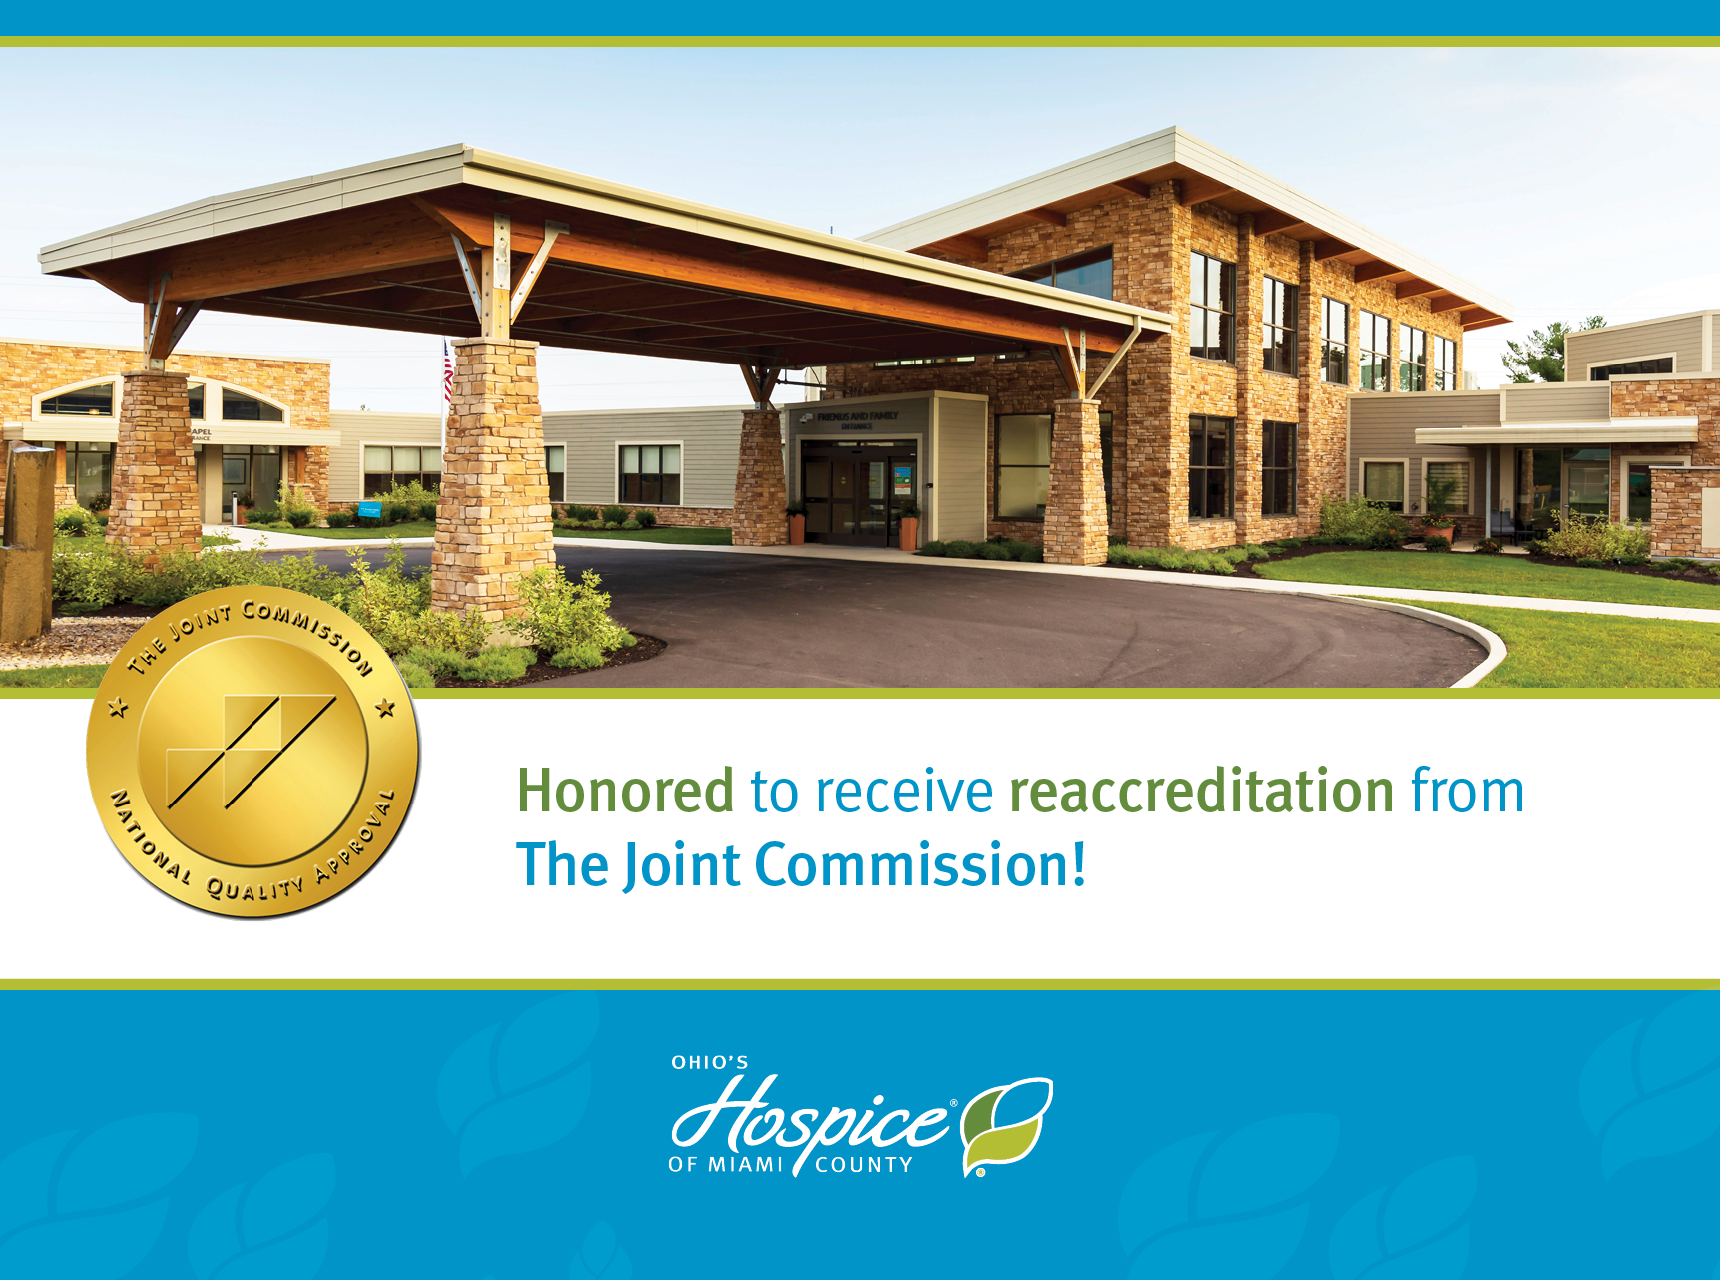 Ohio’s Hospice of Miami County Awarded The Joint Commission's Gold Seal of Approval®